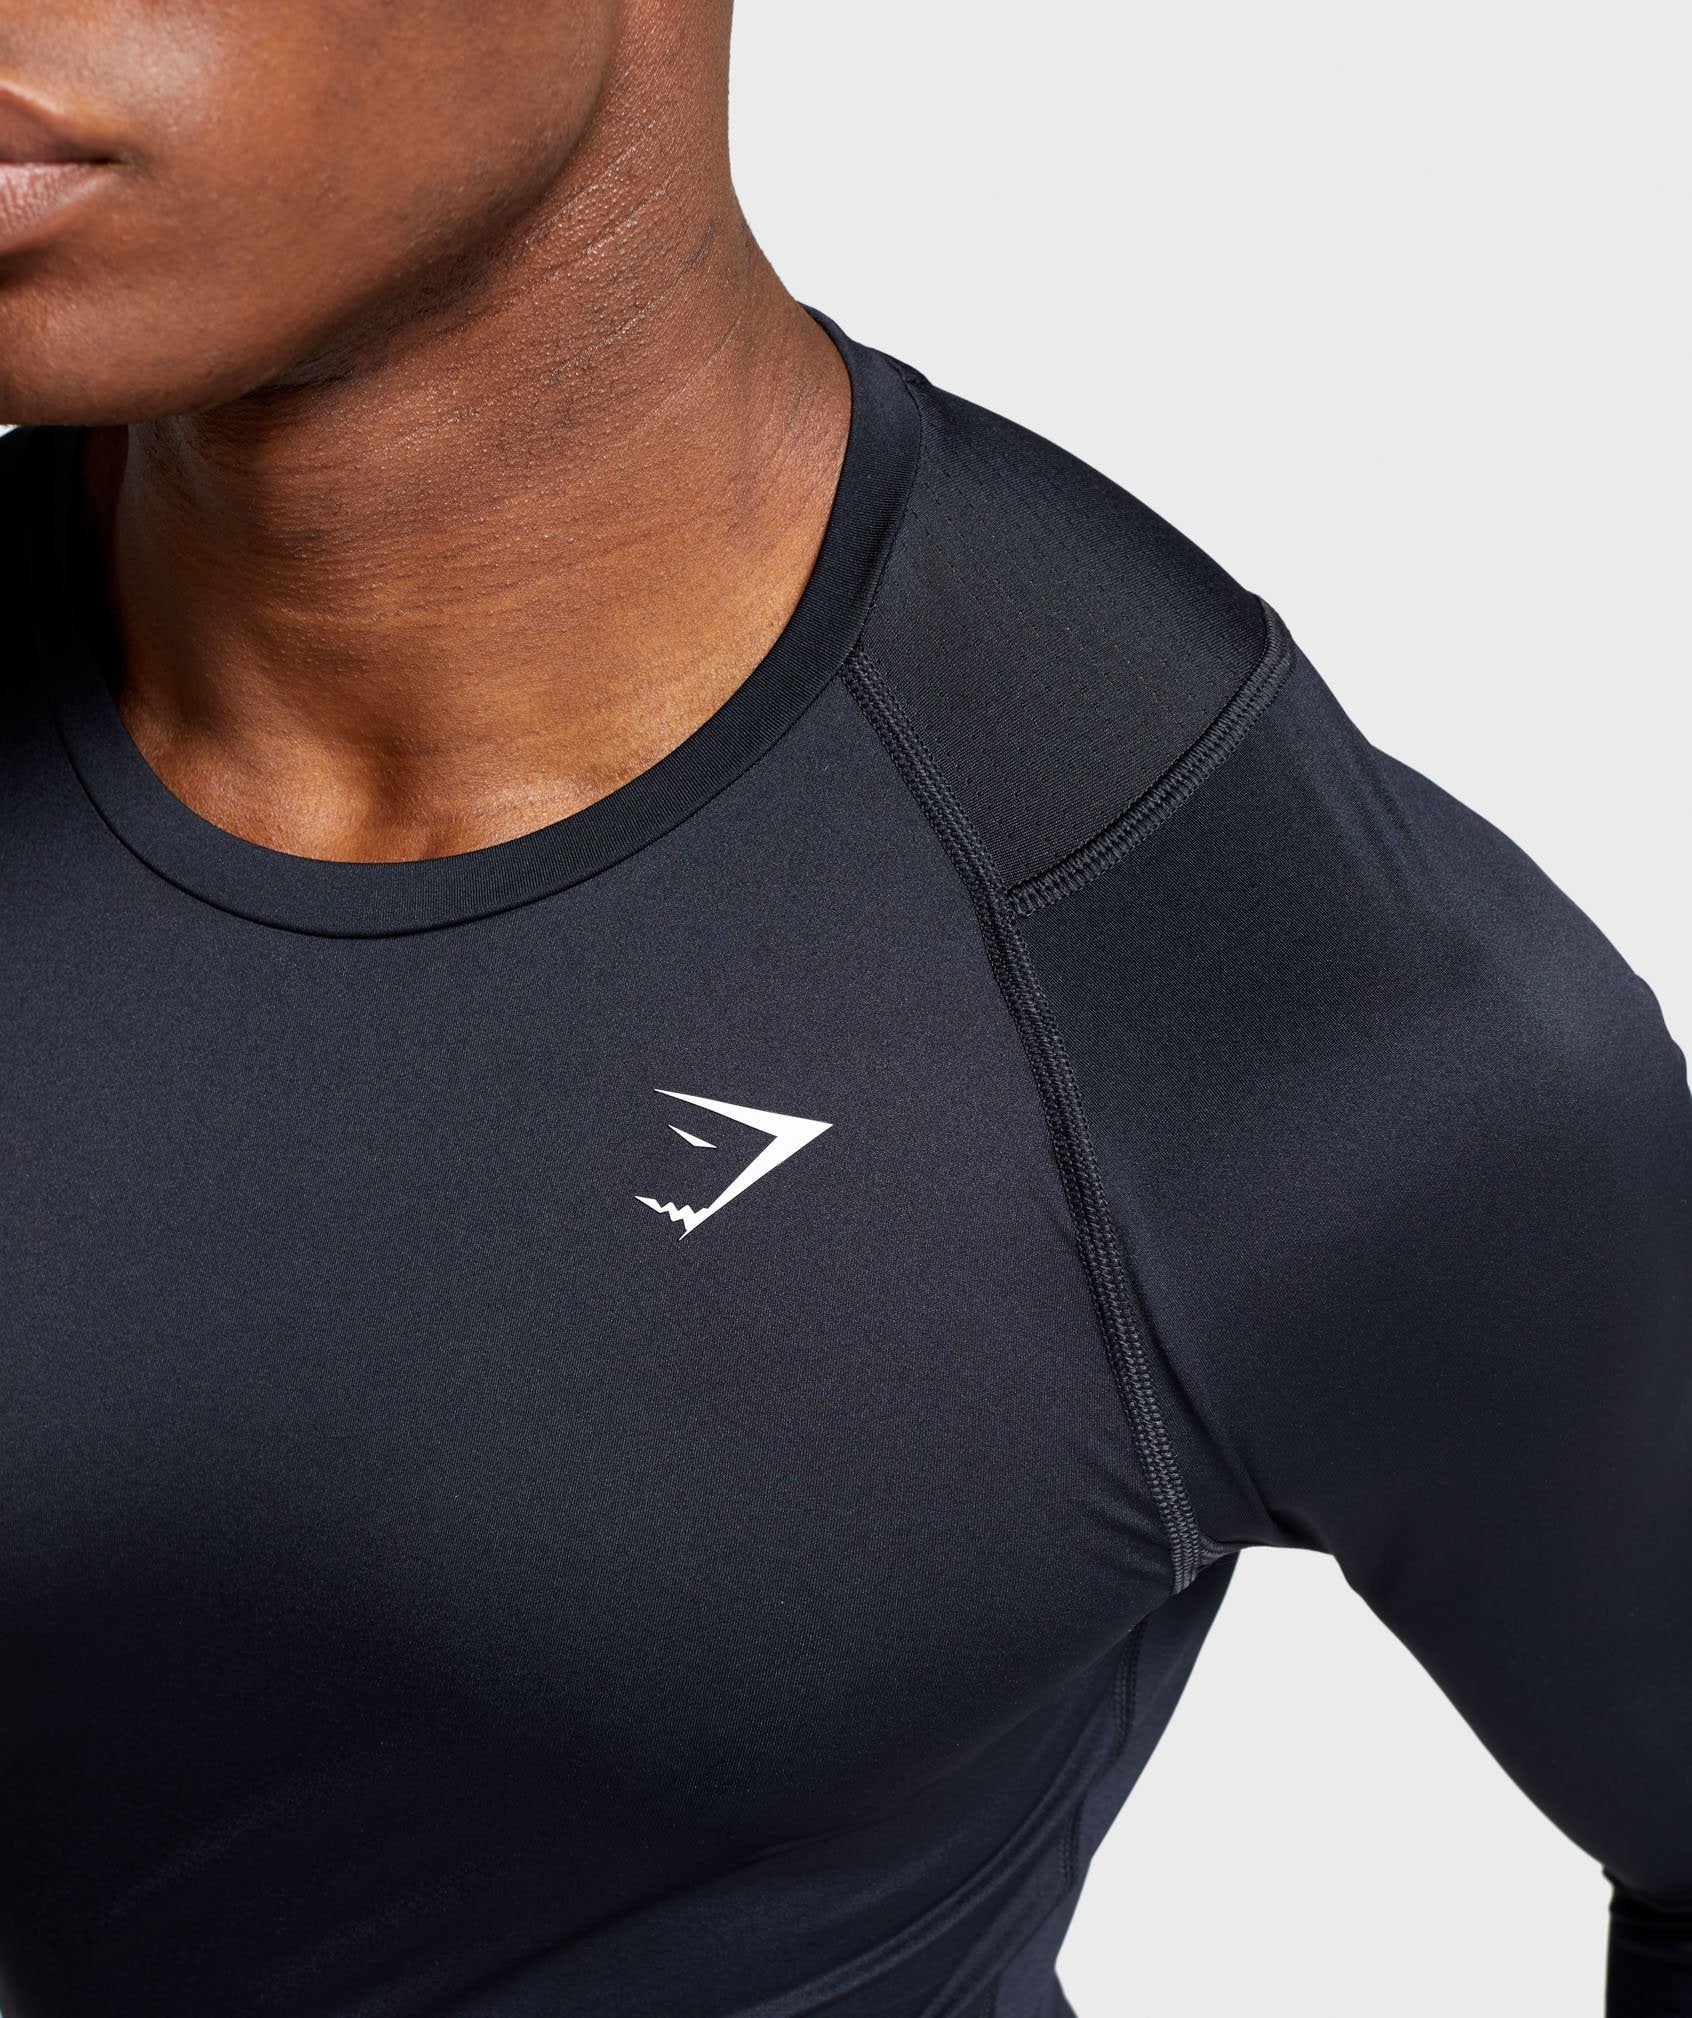 Element Baselayer Long Sleeve T-Shirt in Black - view 5